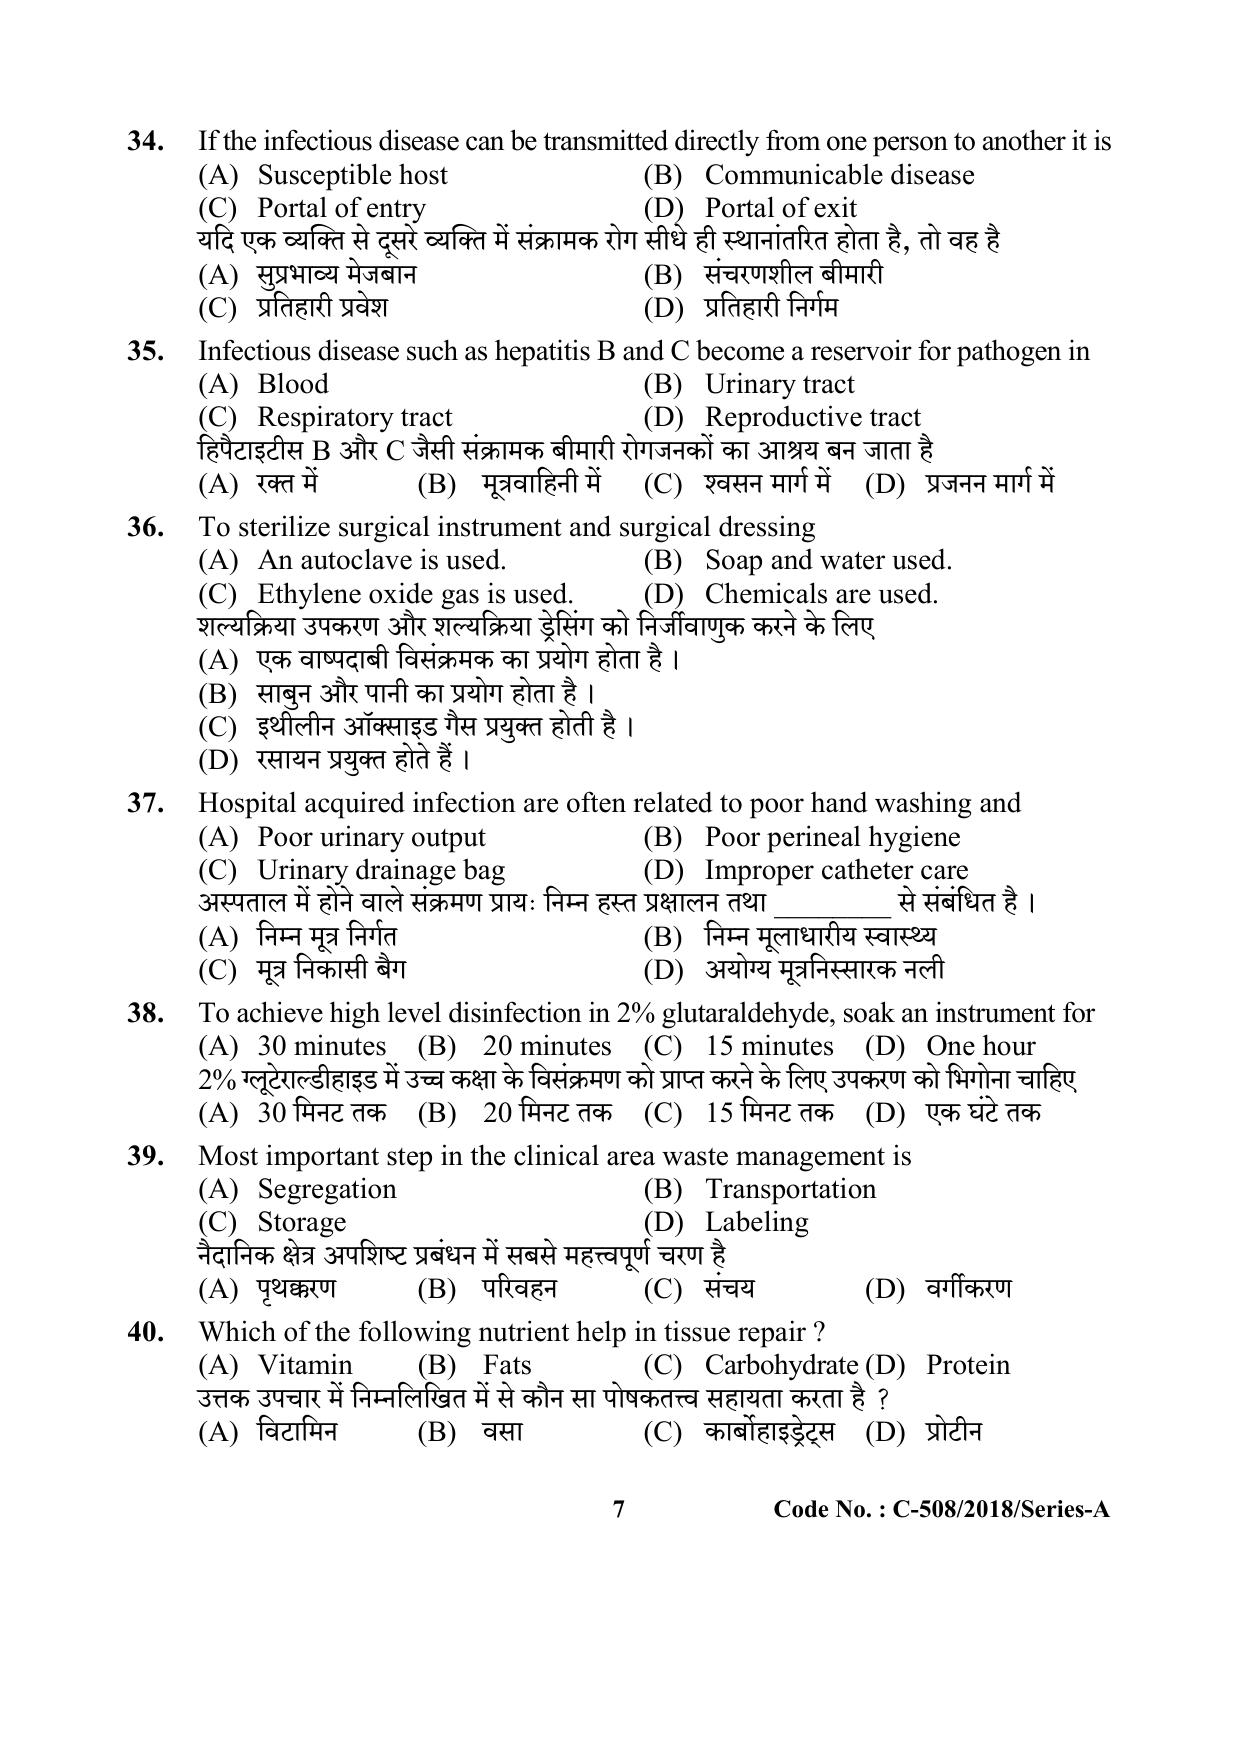 UP Health Worker Thematic Knowledge Previous Year Question Paper - Page 7